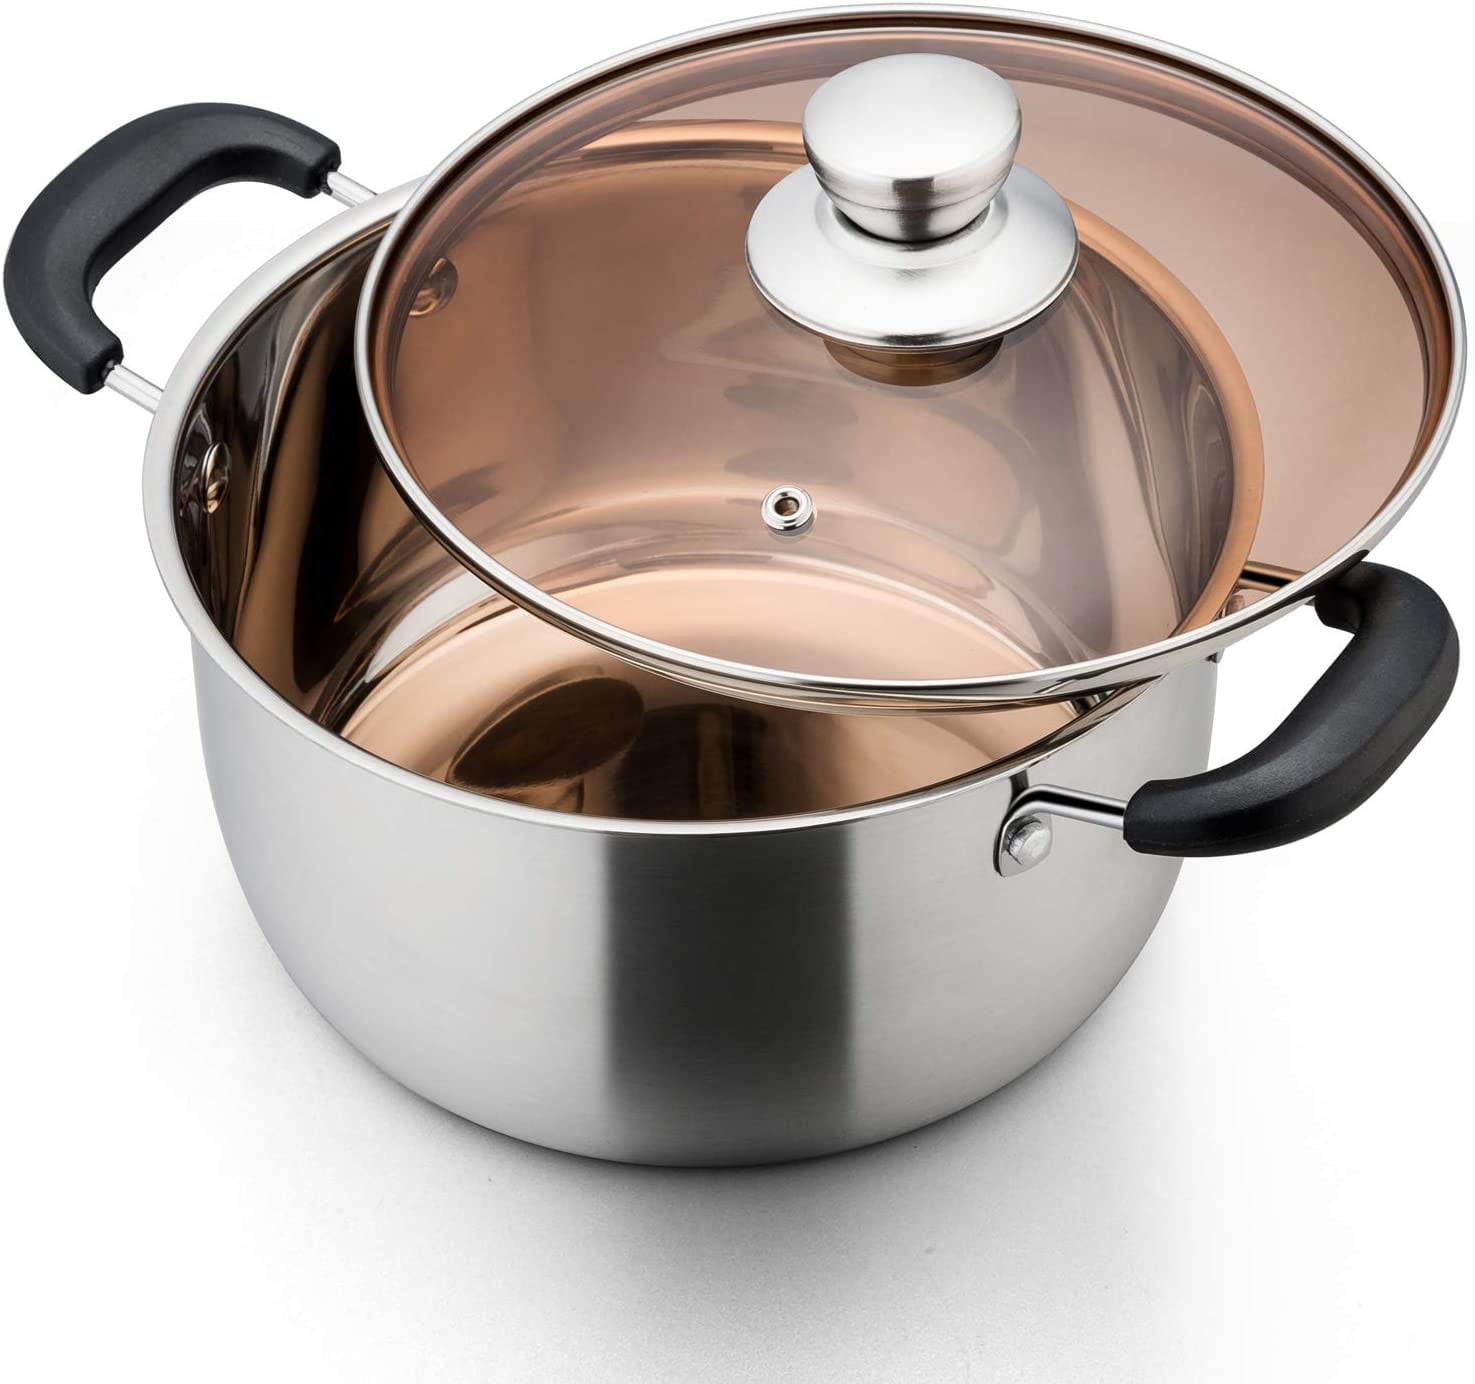 Huaroad Stainless Steel Stockpot Large Pot Sauce Pot Induction Pot With  Lid- 3/4/5 Holes Pasta Cooker Insert Set For Home Kitchen Restaurant  Strainer